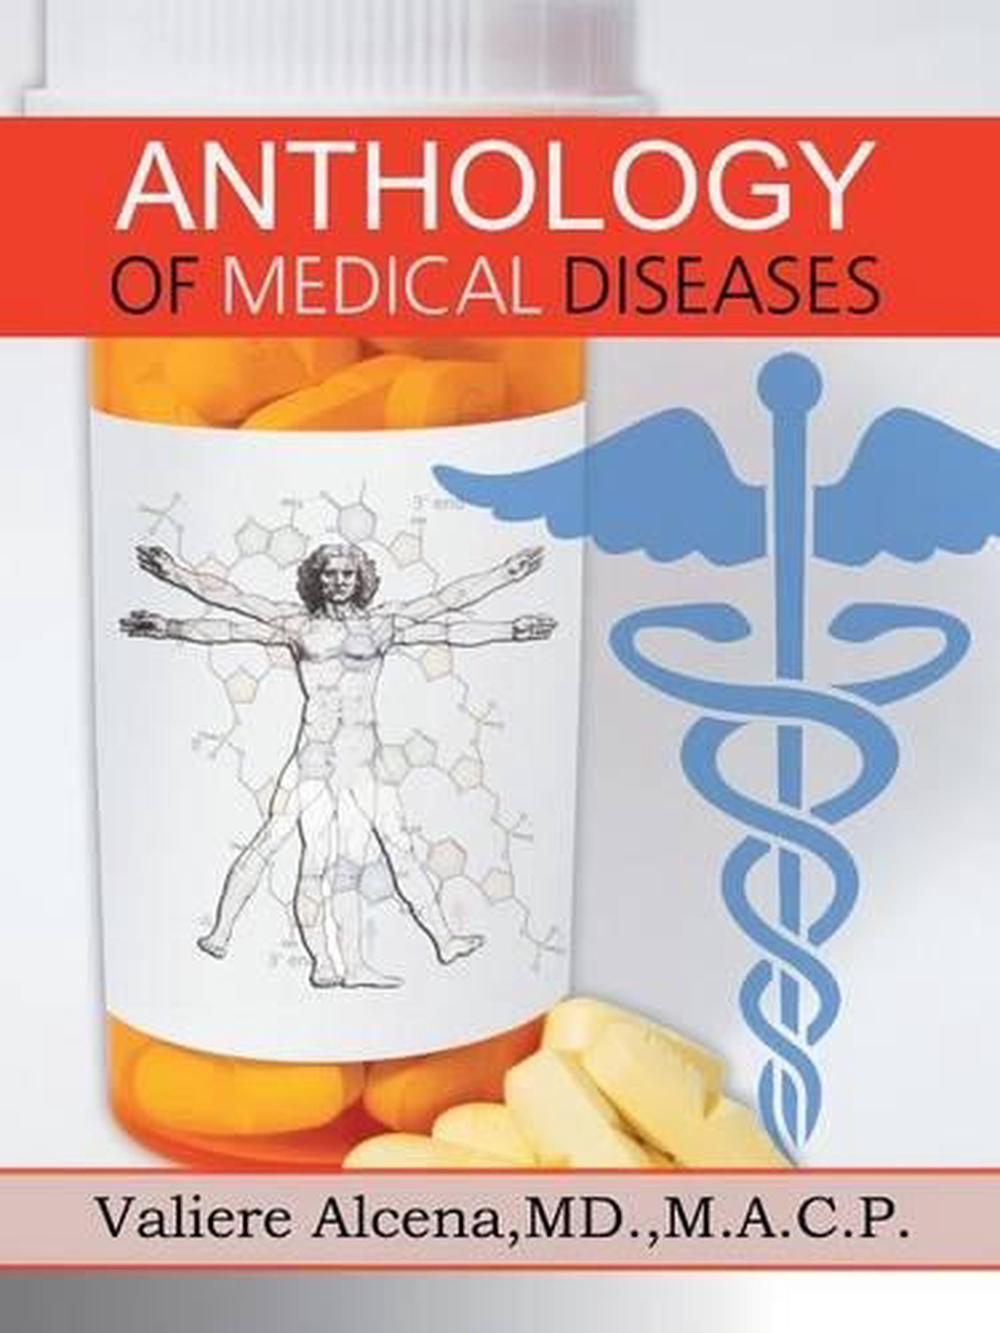 amc anthology of medical conditions